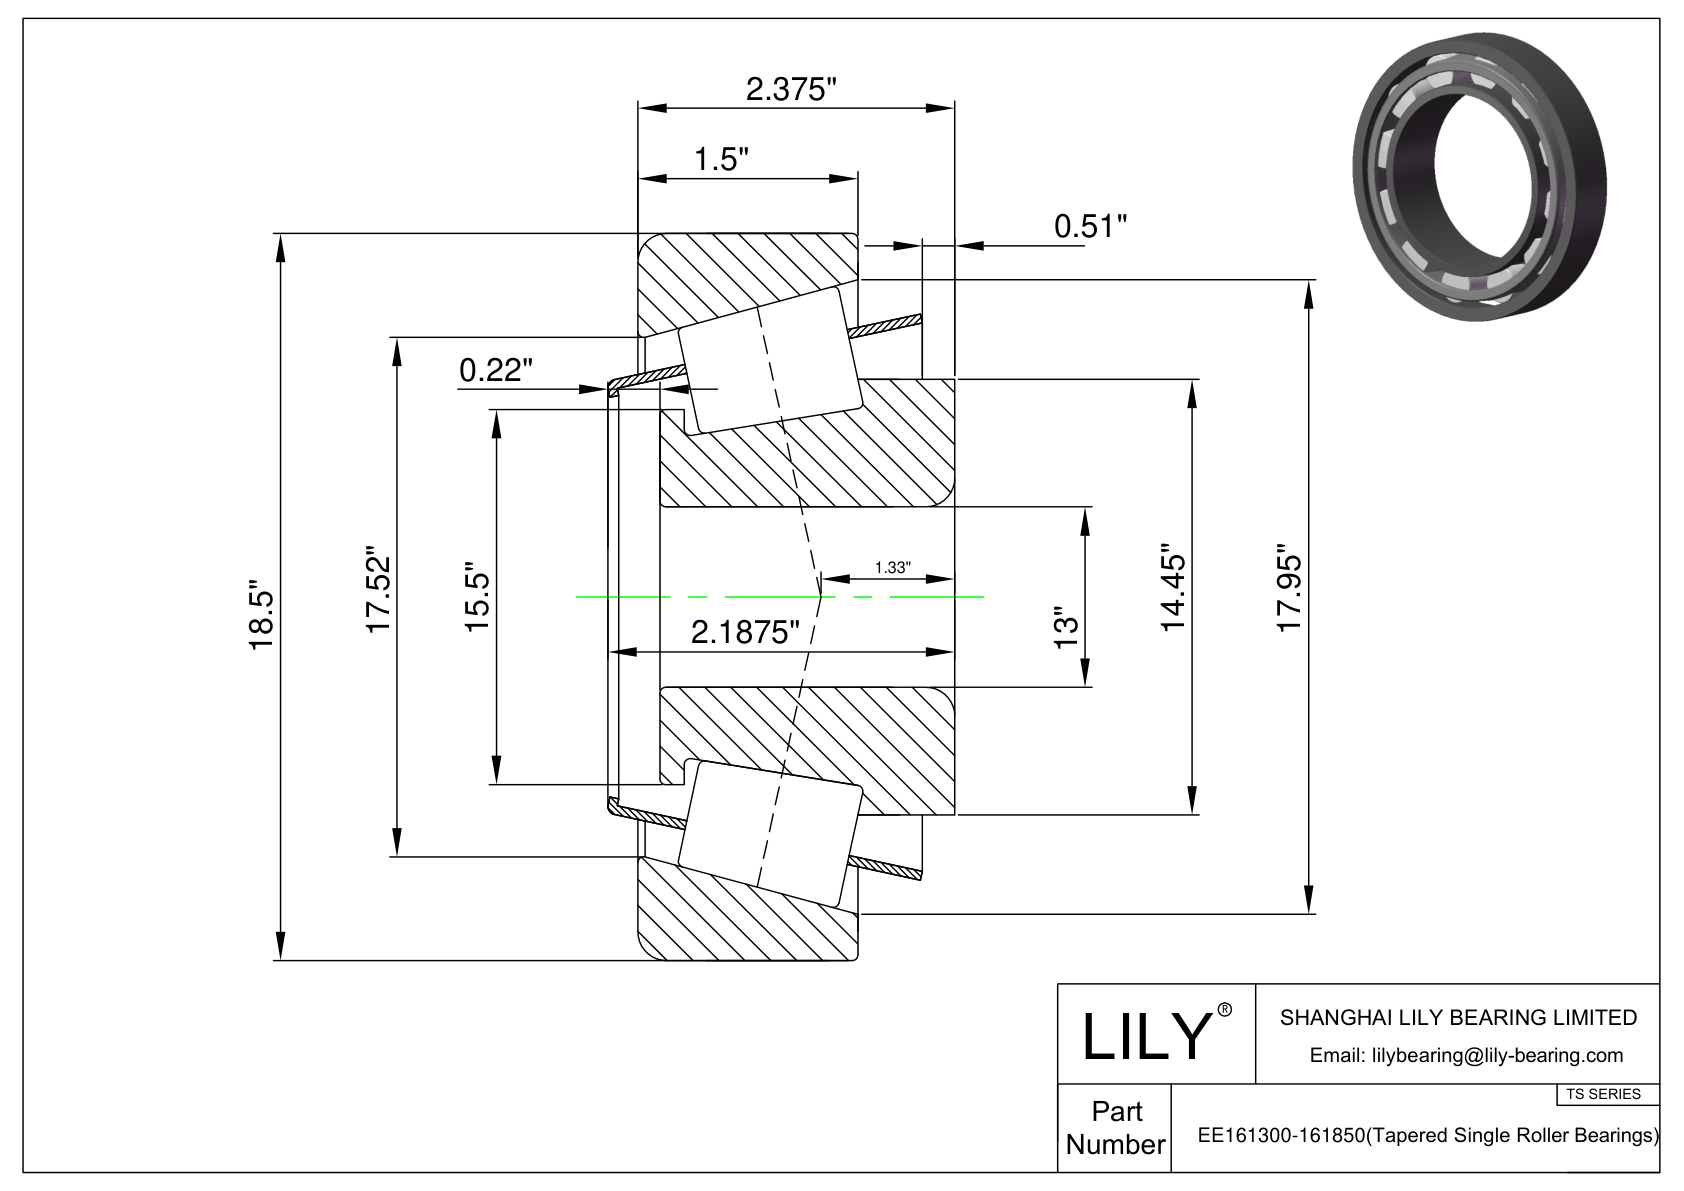 EE161300-161850 TS (Tapered Single Roller Bearings) (Imperial) cad drawing